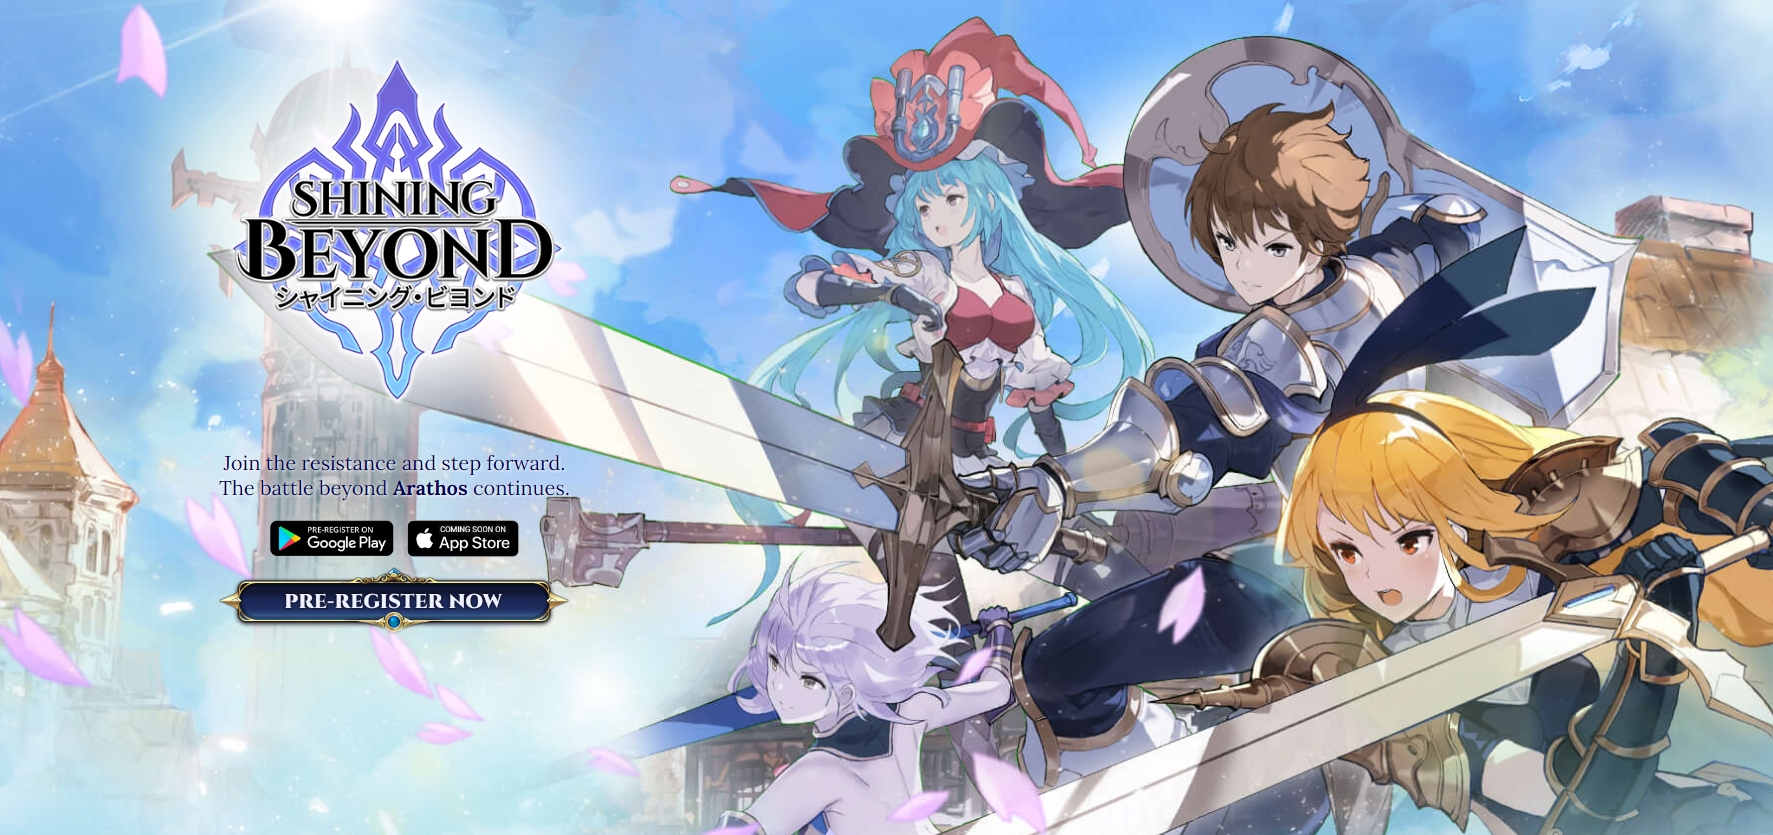 XII Braves’ Mobile RPG Shining Beyond Launches On November 26